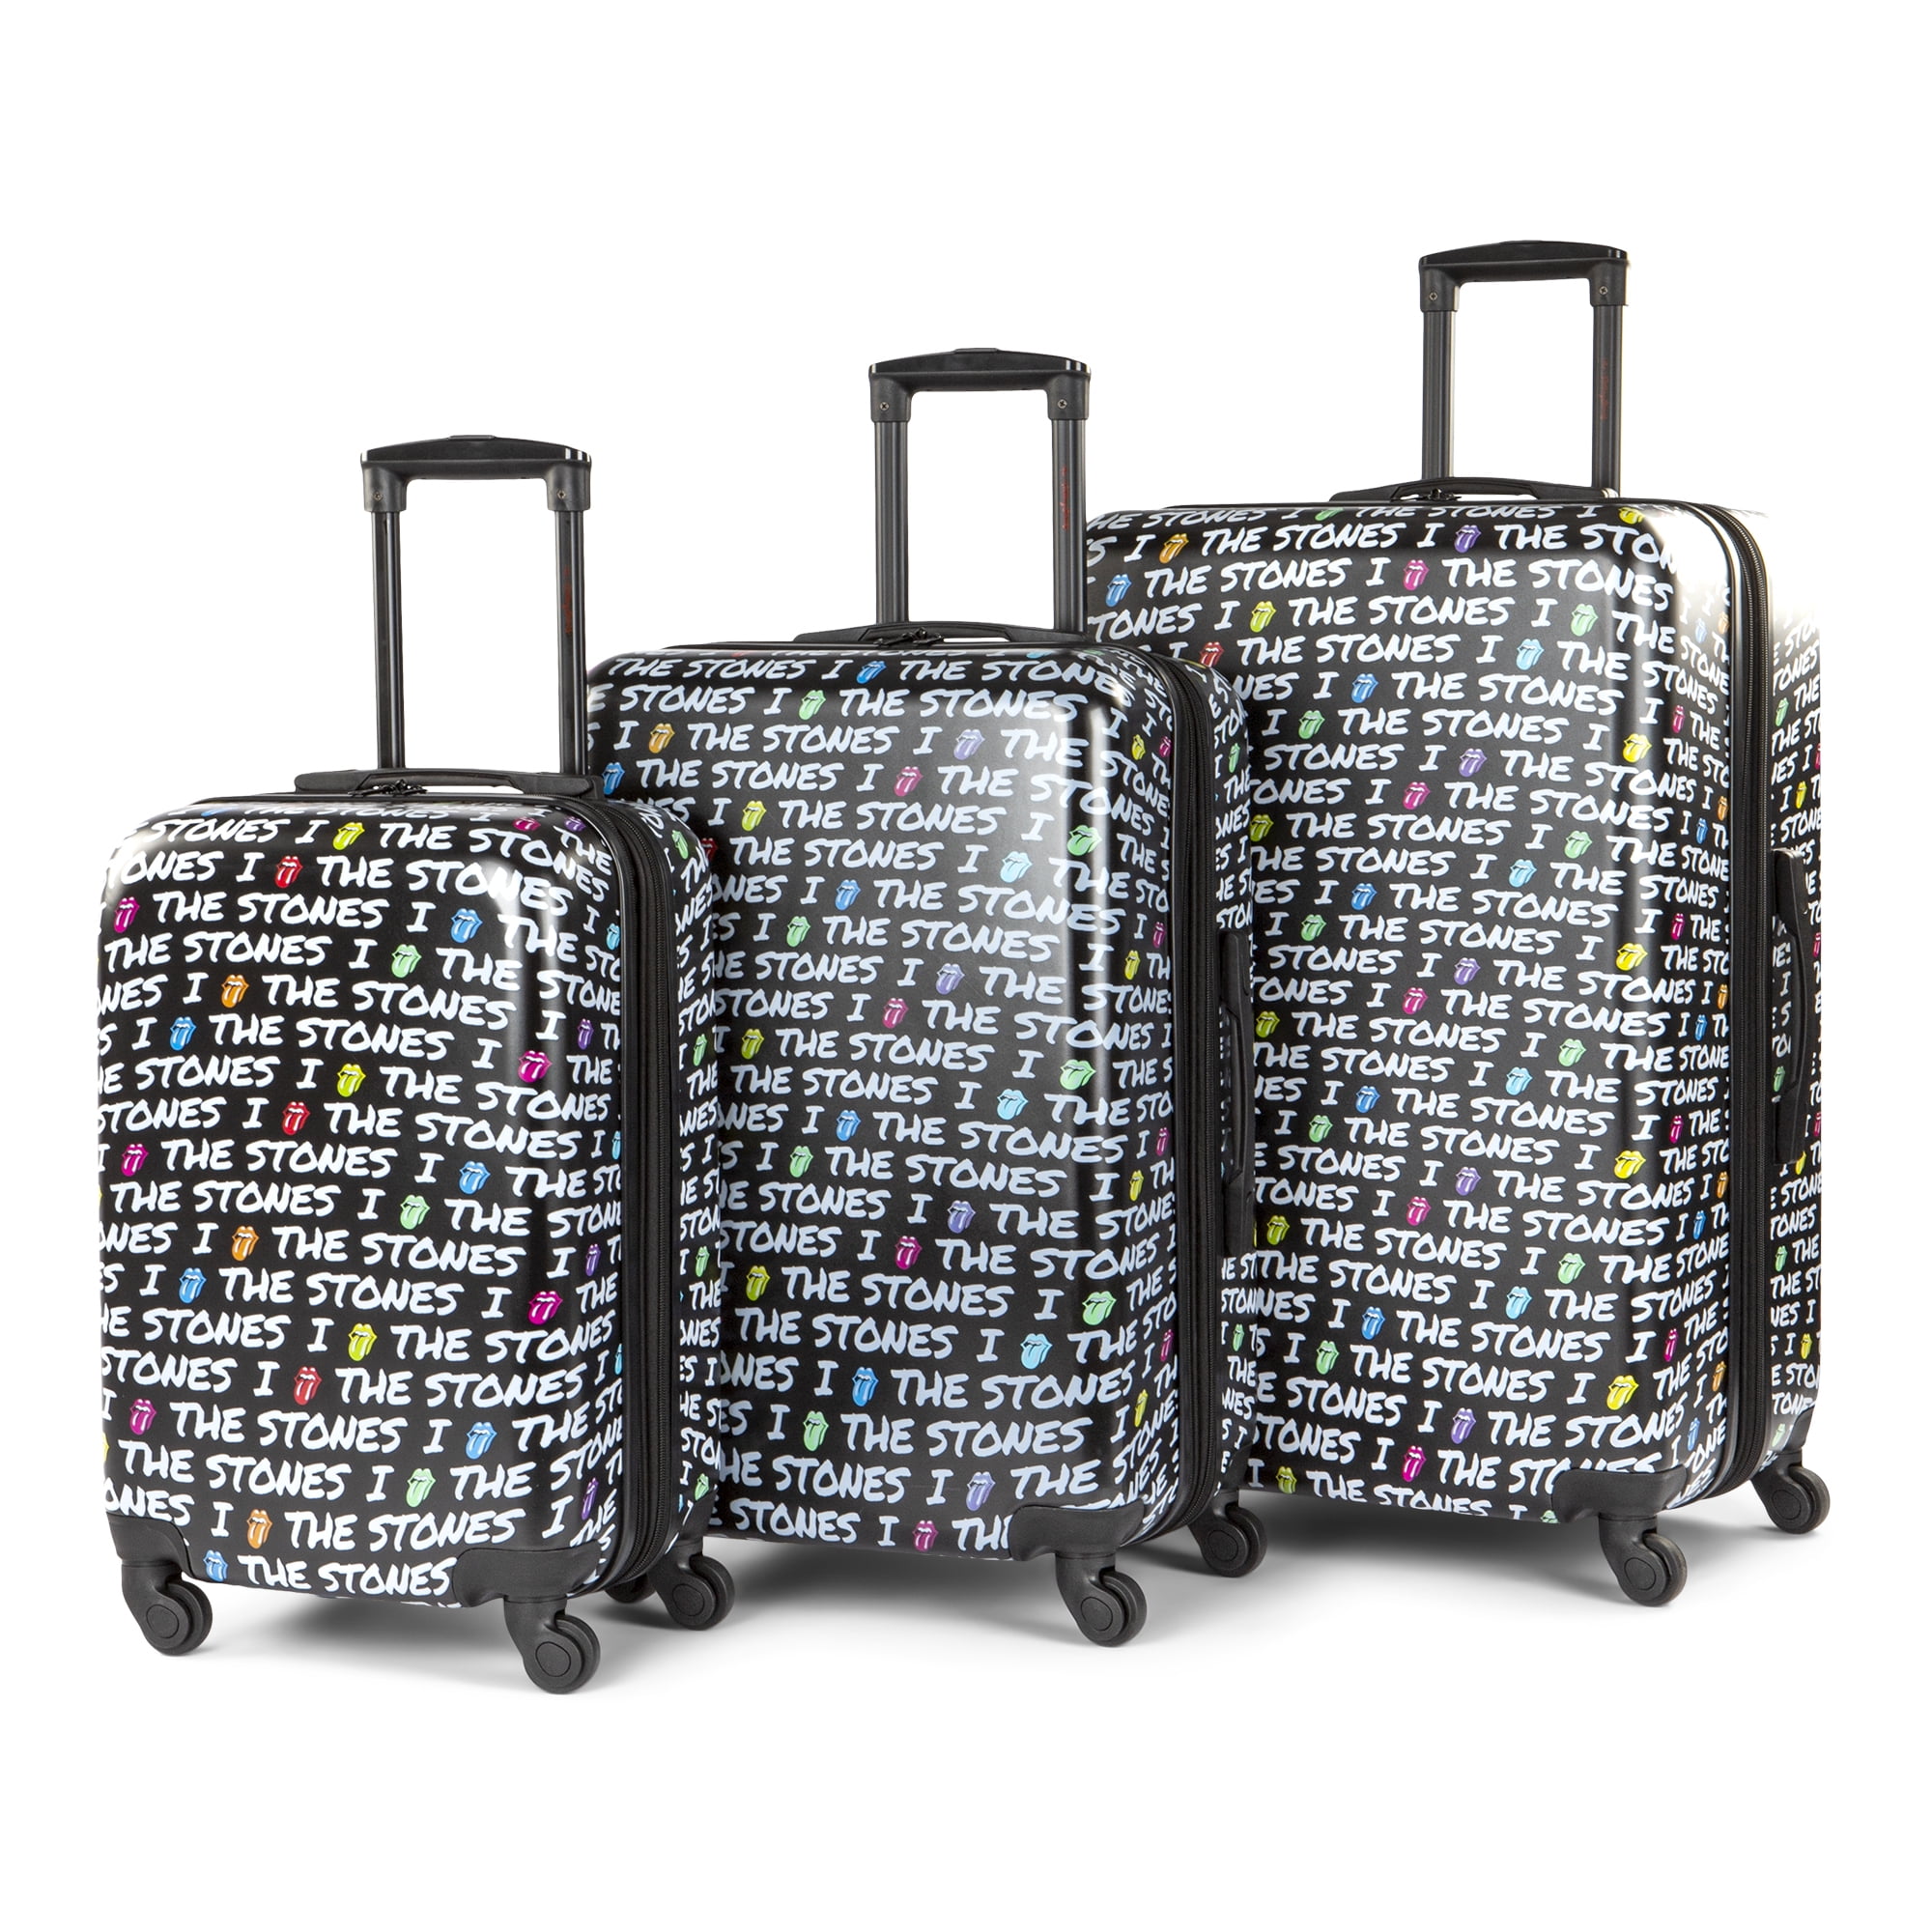 The Rolling Stones - Stray Cat Blues 3 piece Luggage set - Multi Color ...